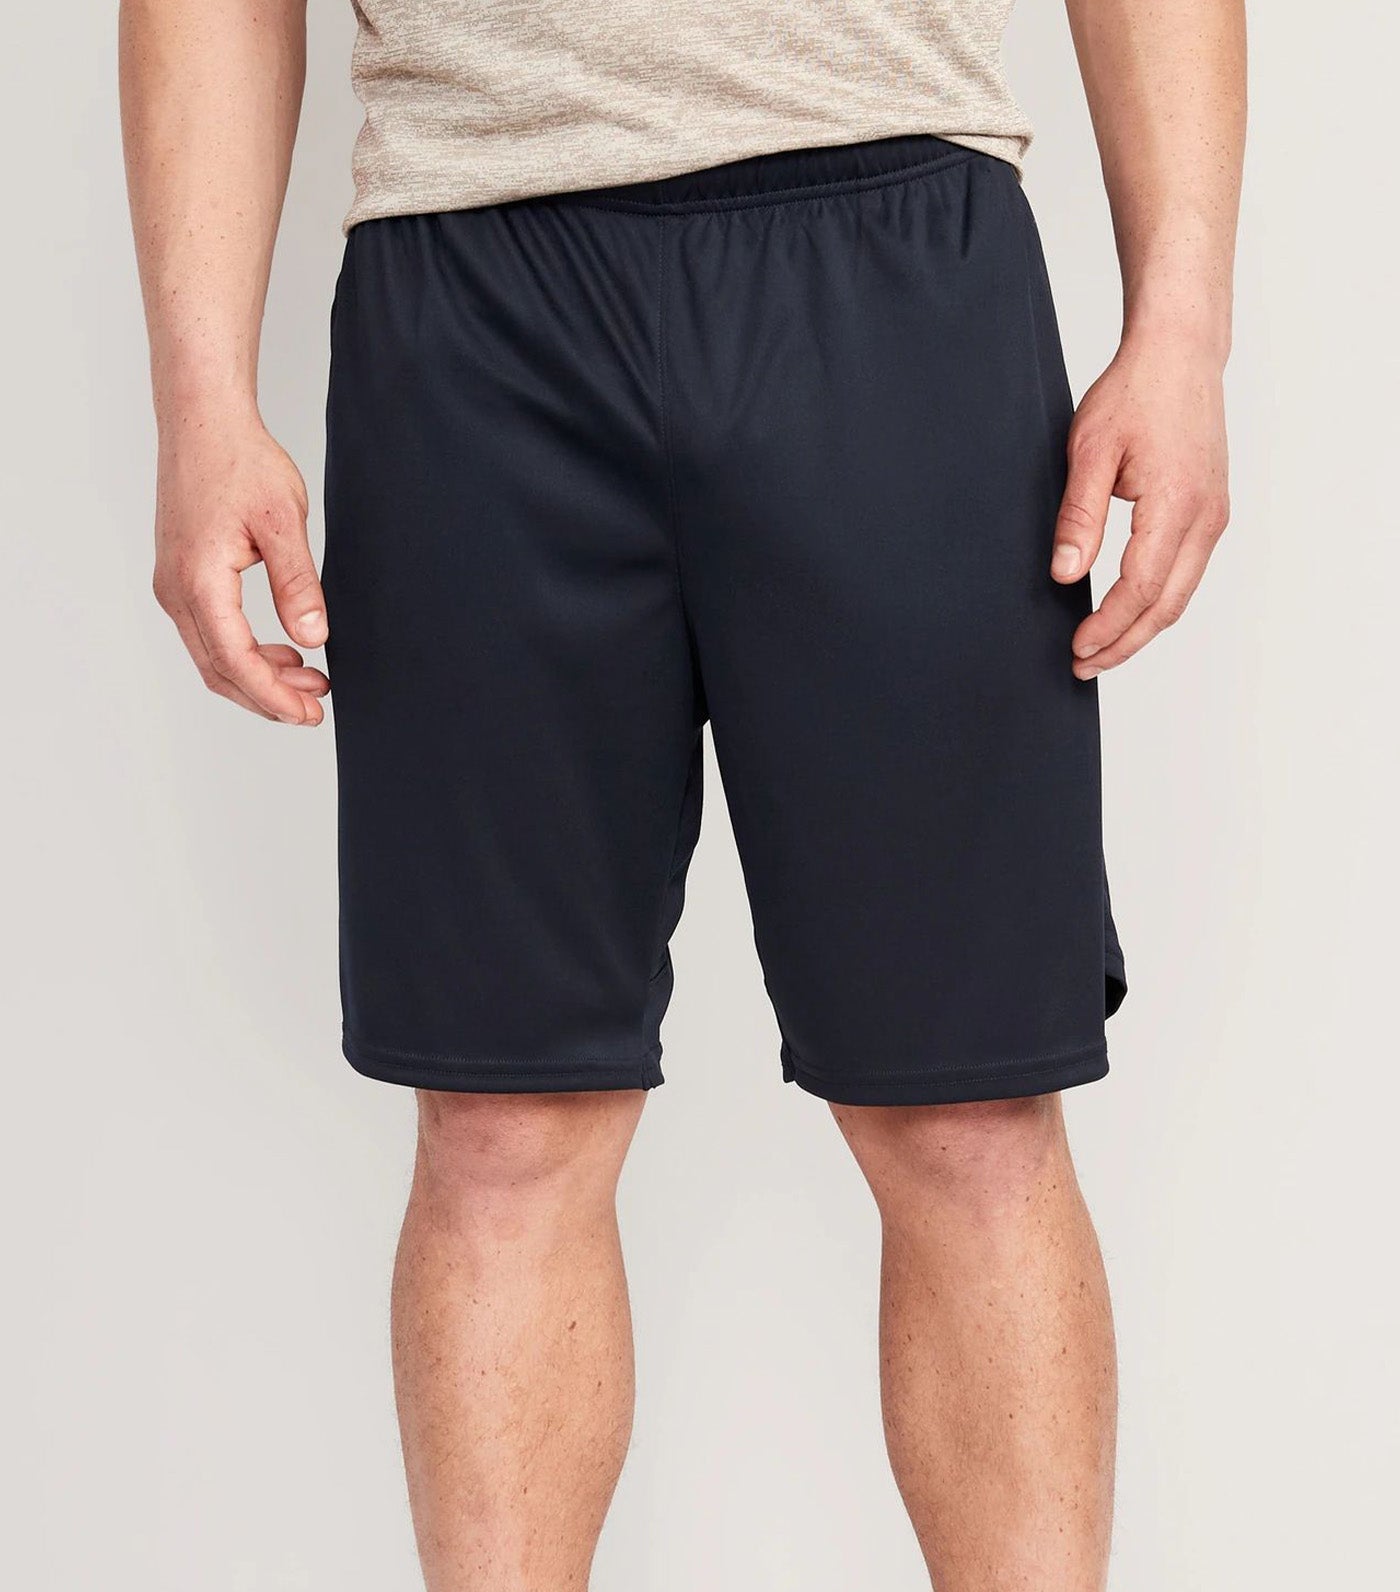 Go-Dry Mesh Basketball Shorts for Men - 9-inch inseam In The Navy